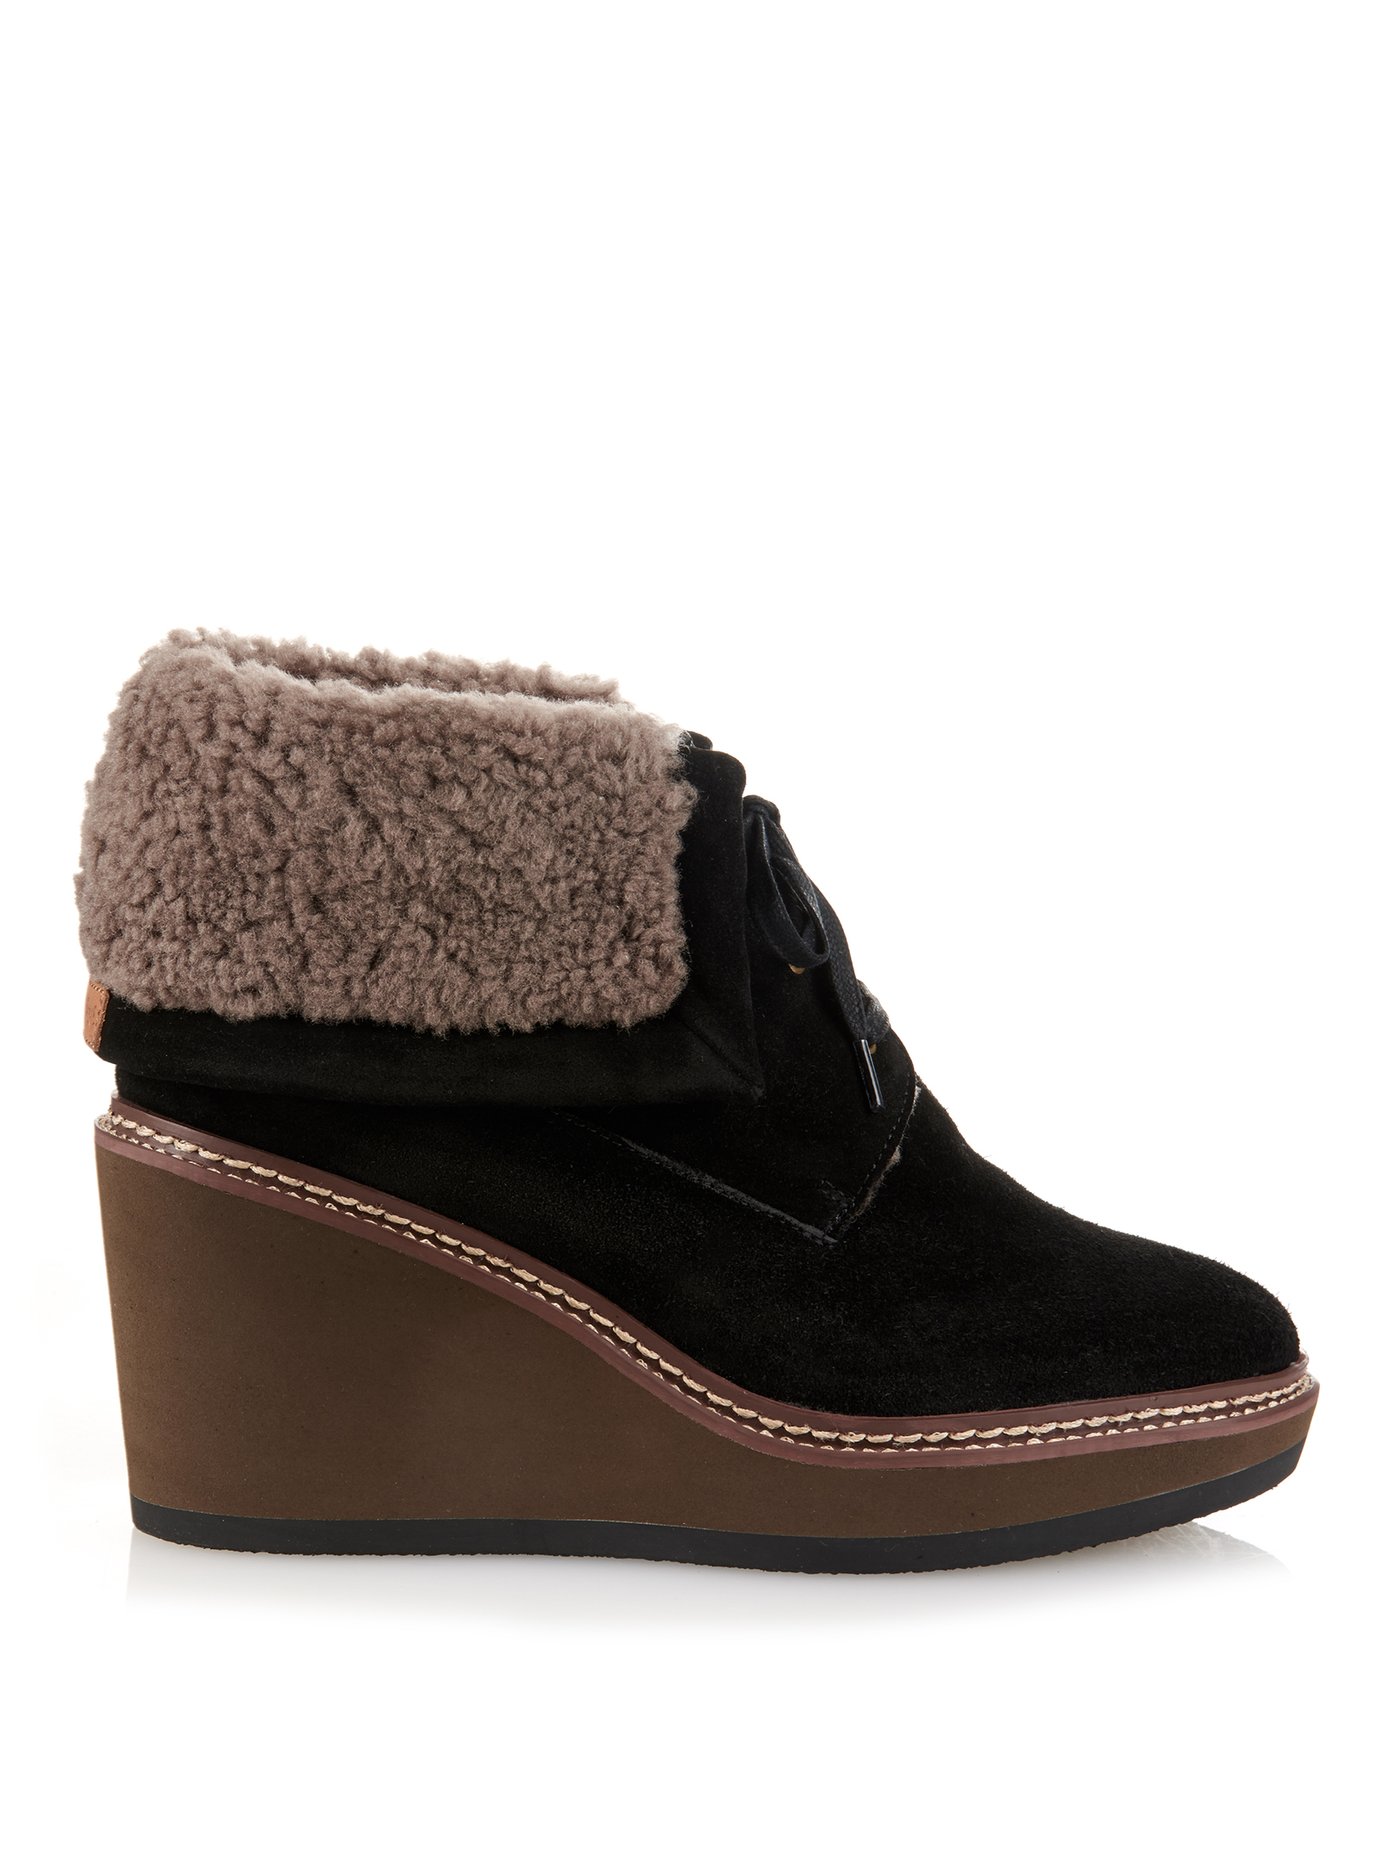 Brasilia wedge suede boots | See By 